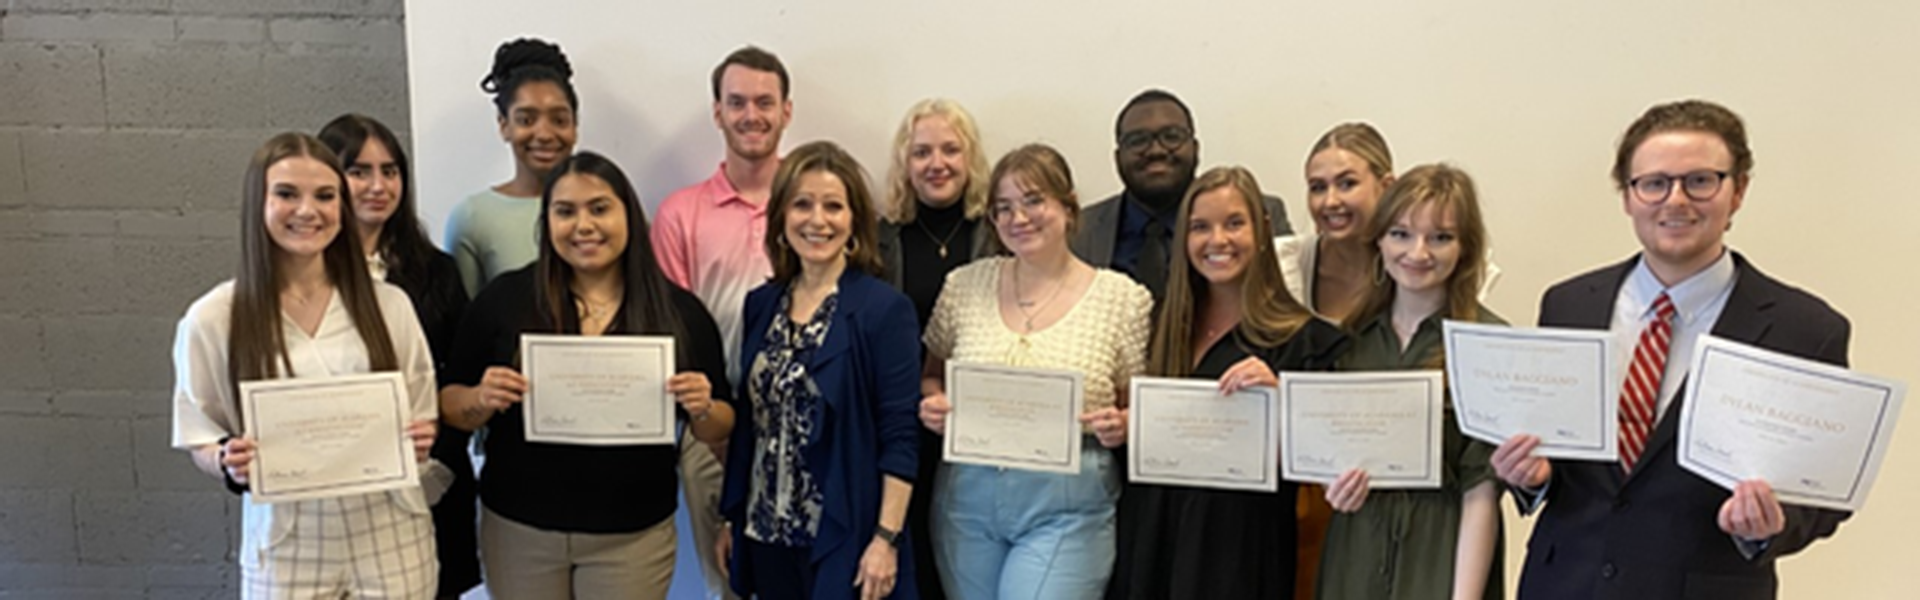 Students in UAB’s Public Relations program sweep state awards